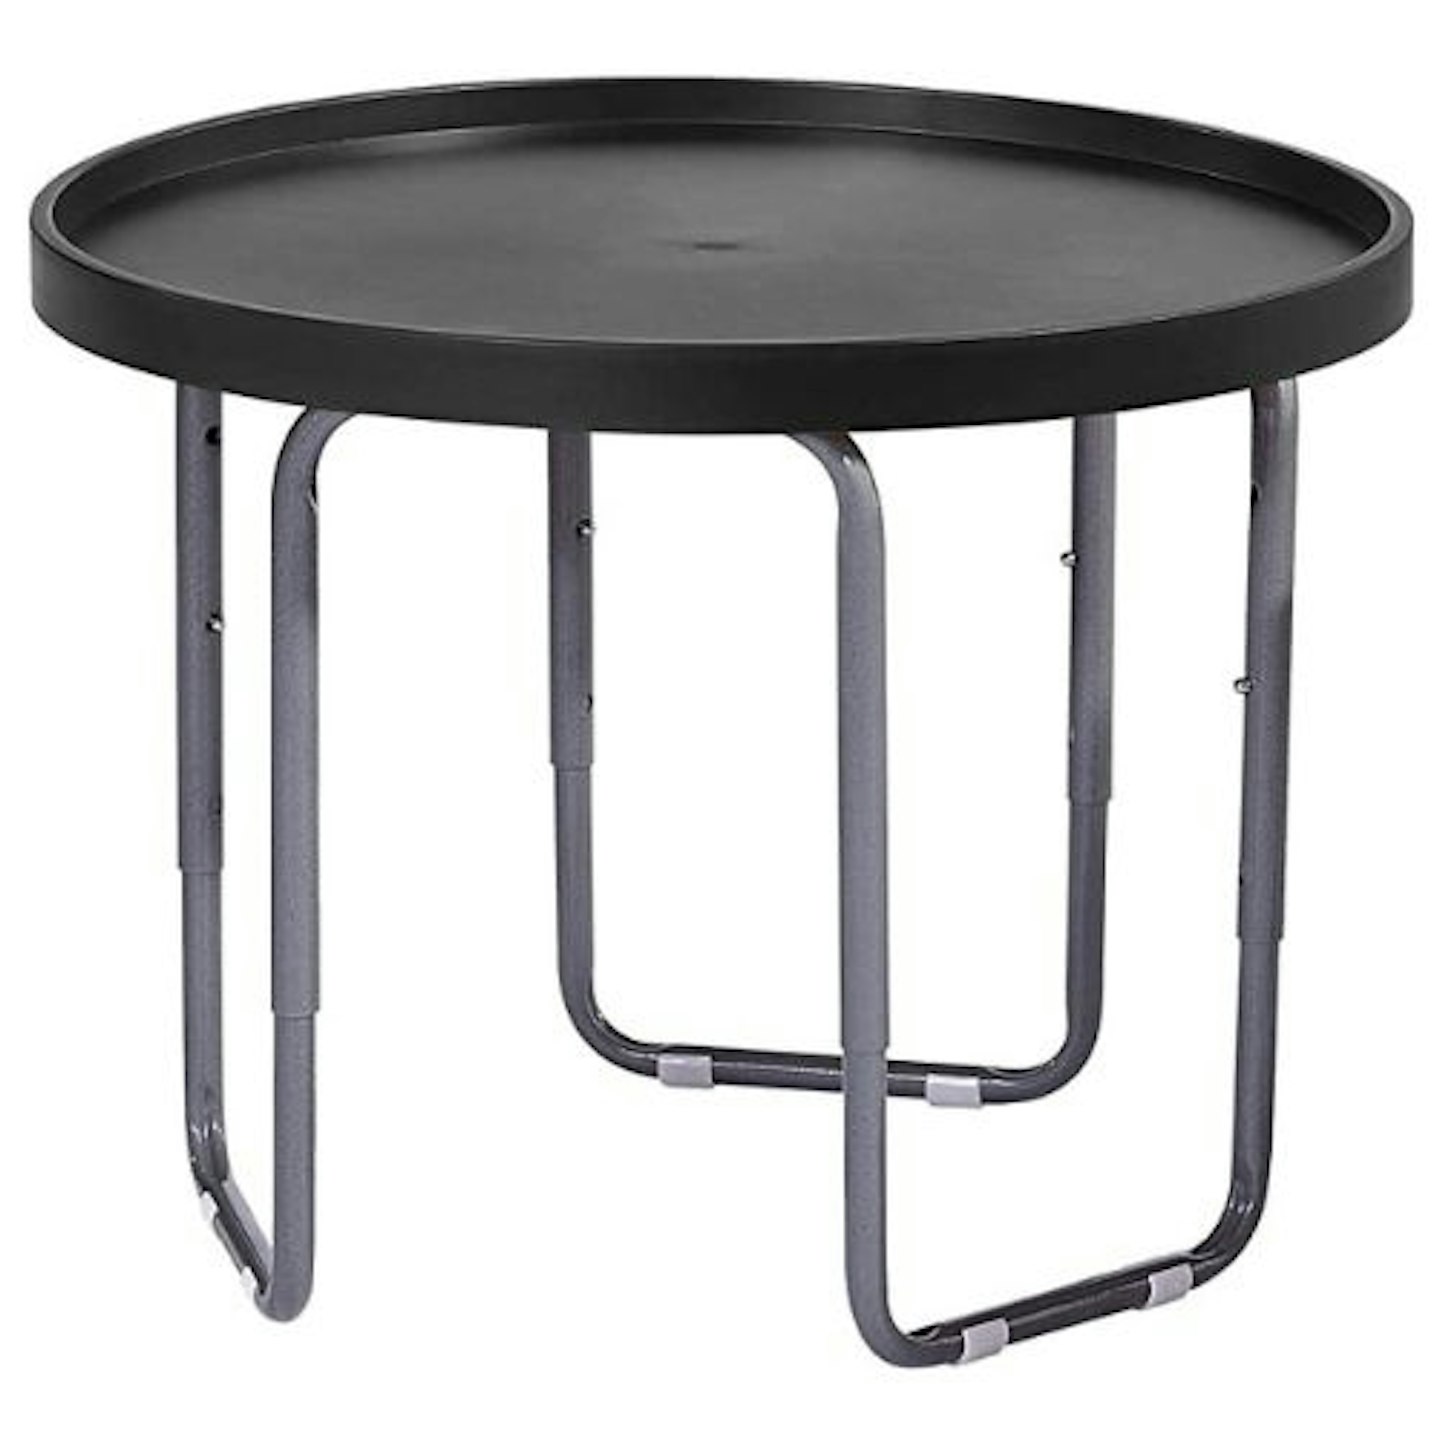 Tufff Spot Children's Round Utility Mixing Play Tray Table